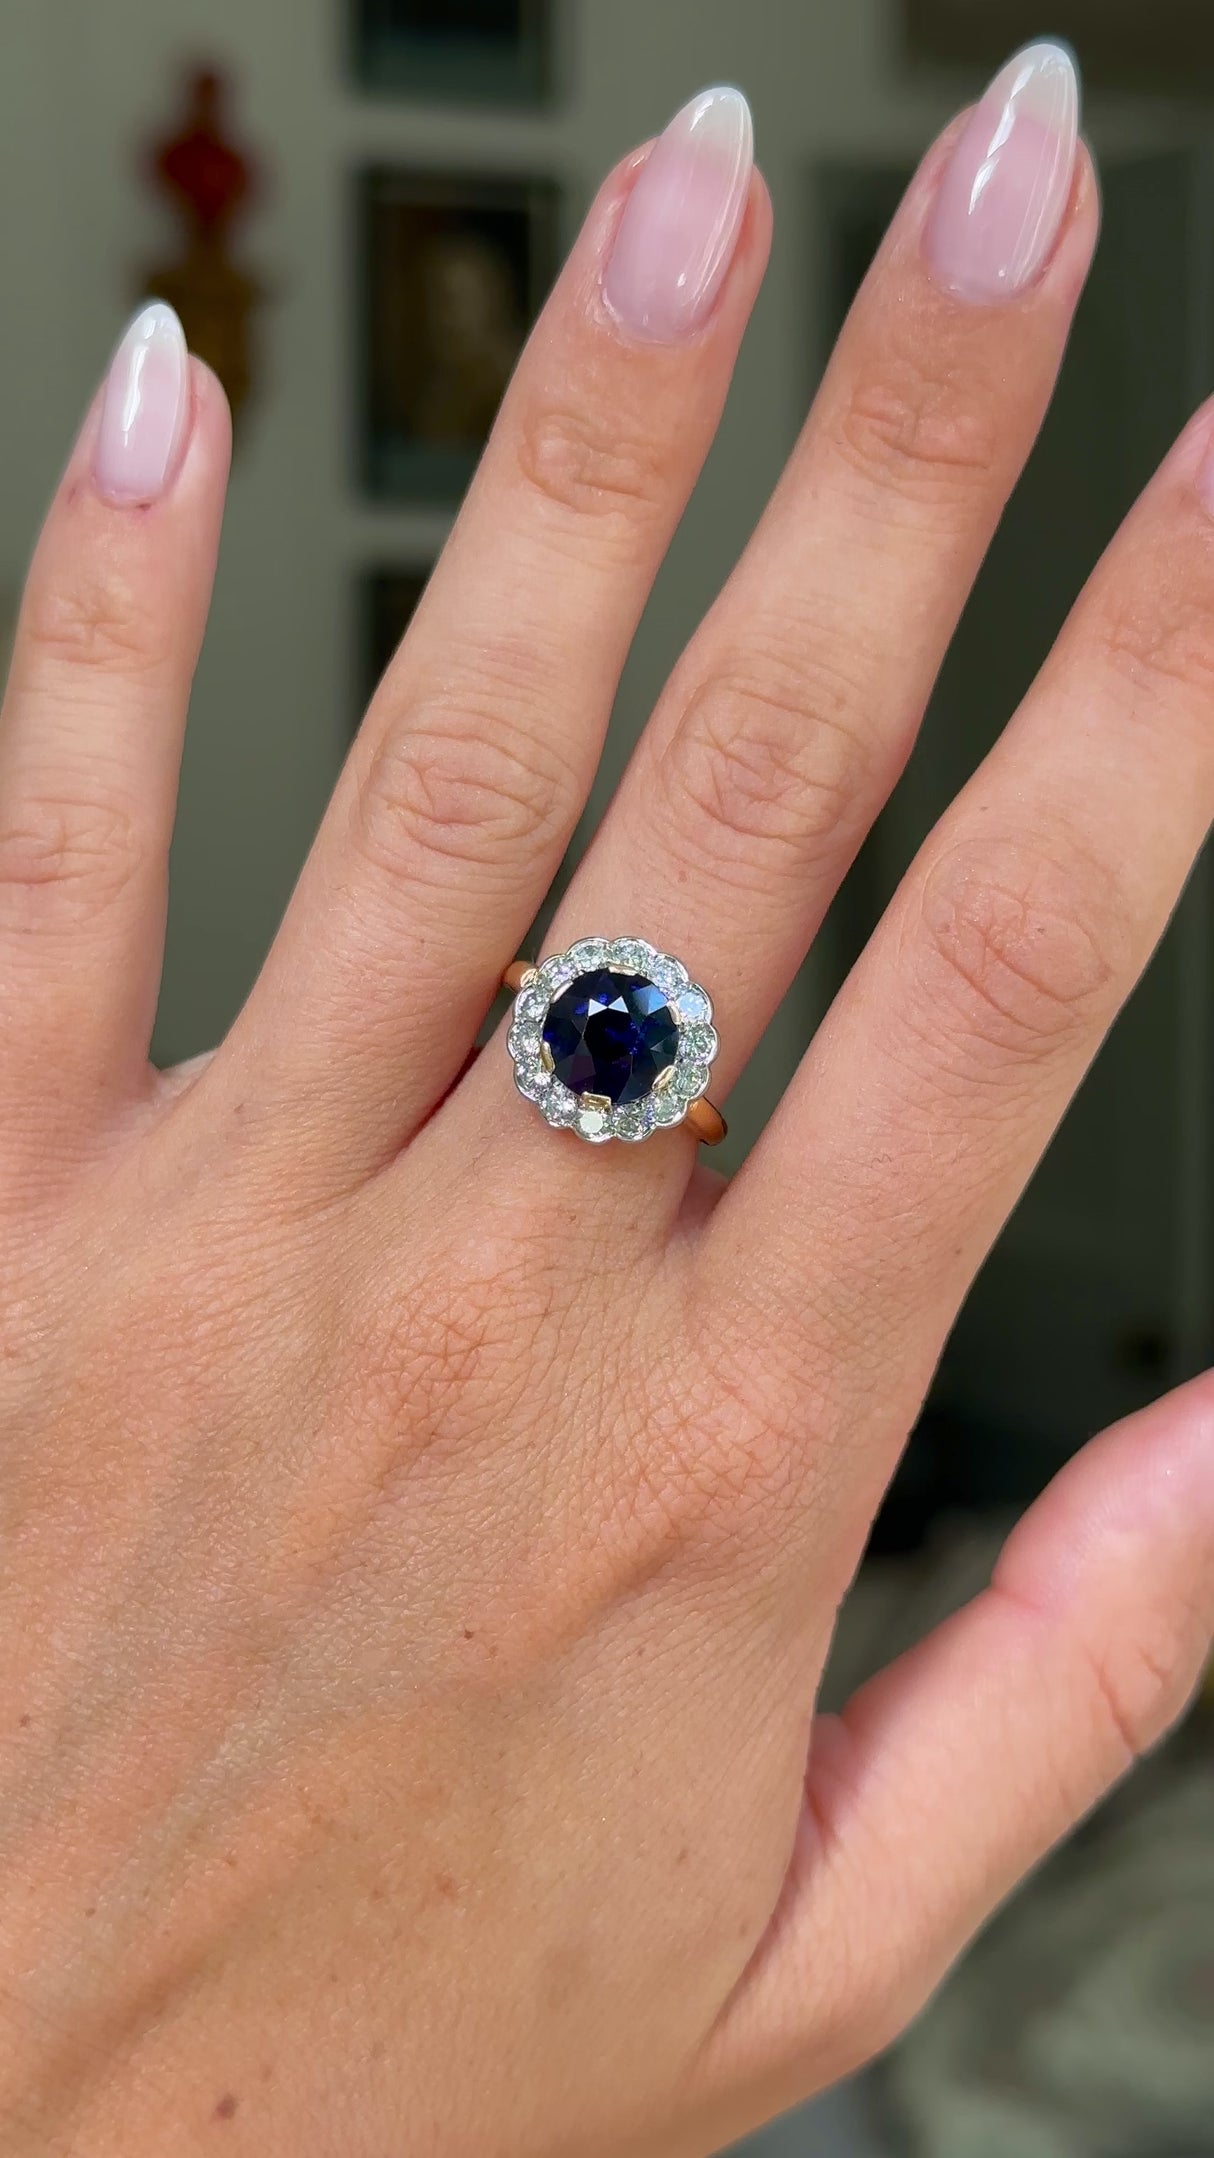 belle epoque sapphire and diamond cluster ring, worn on hand and moved away from lens to give perspective,front view.